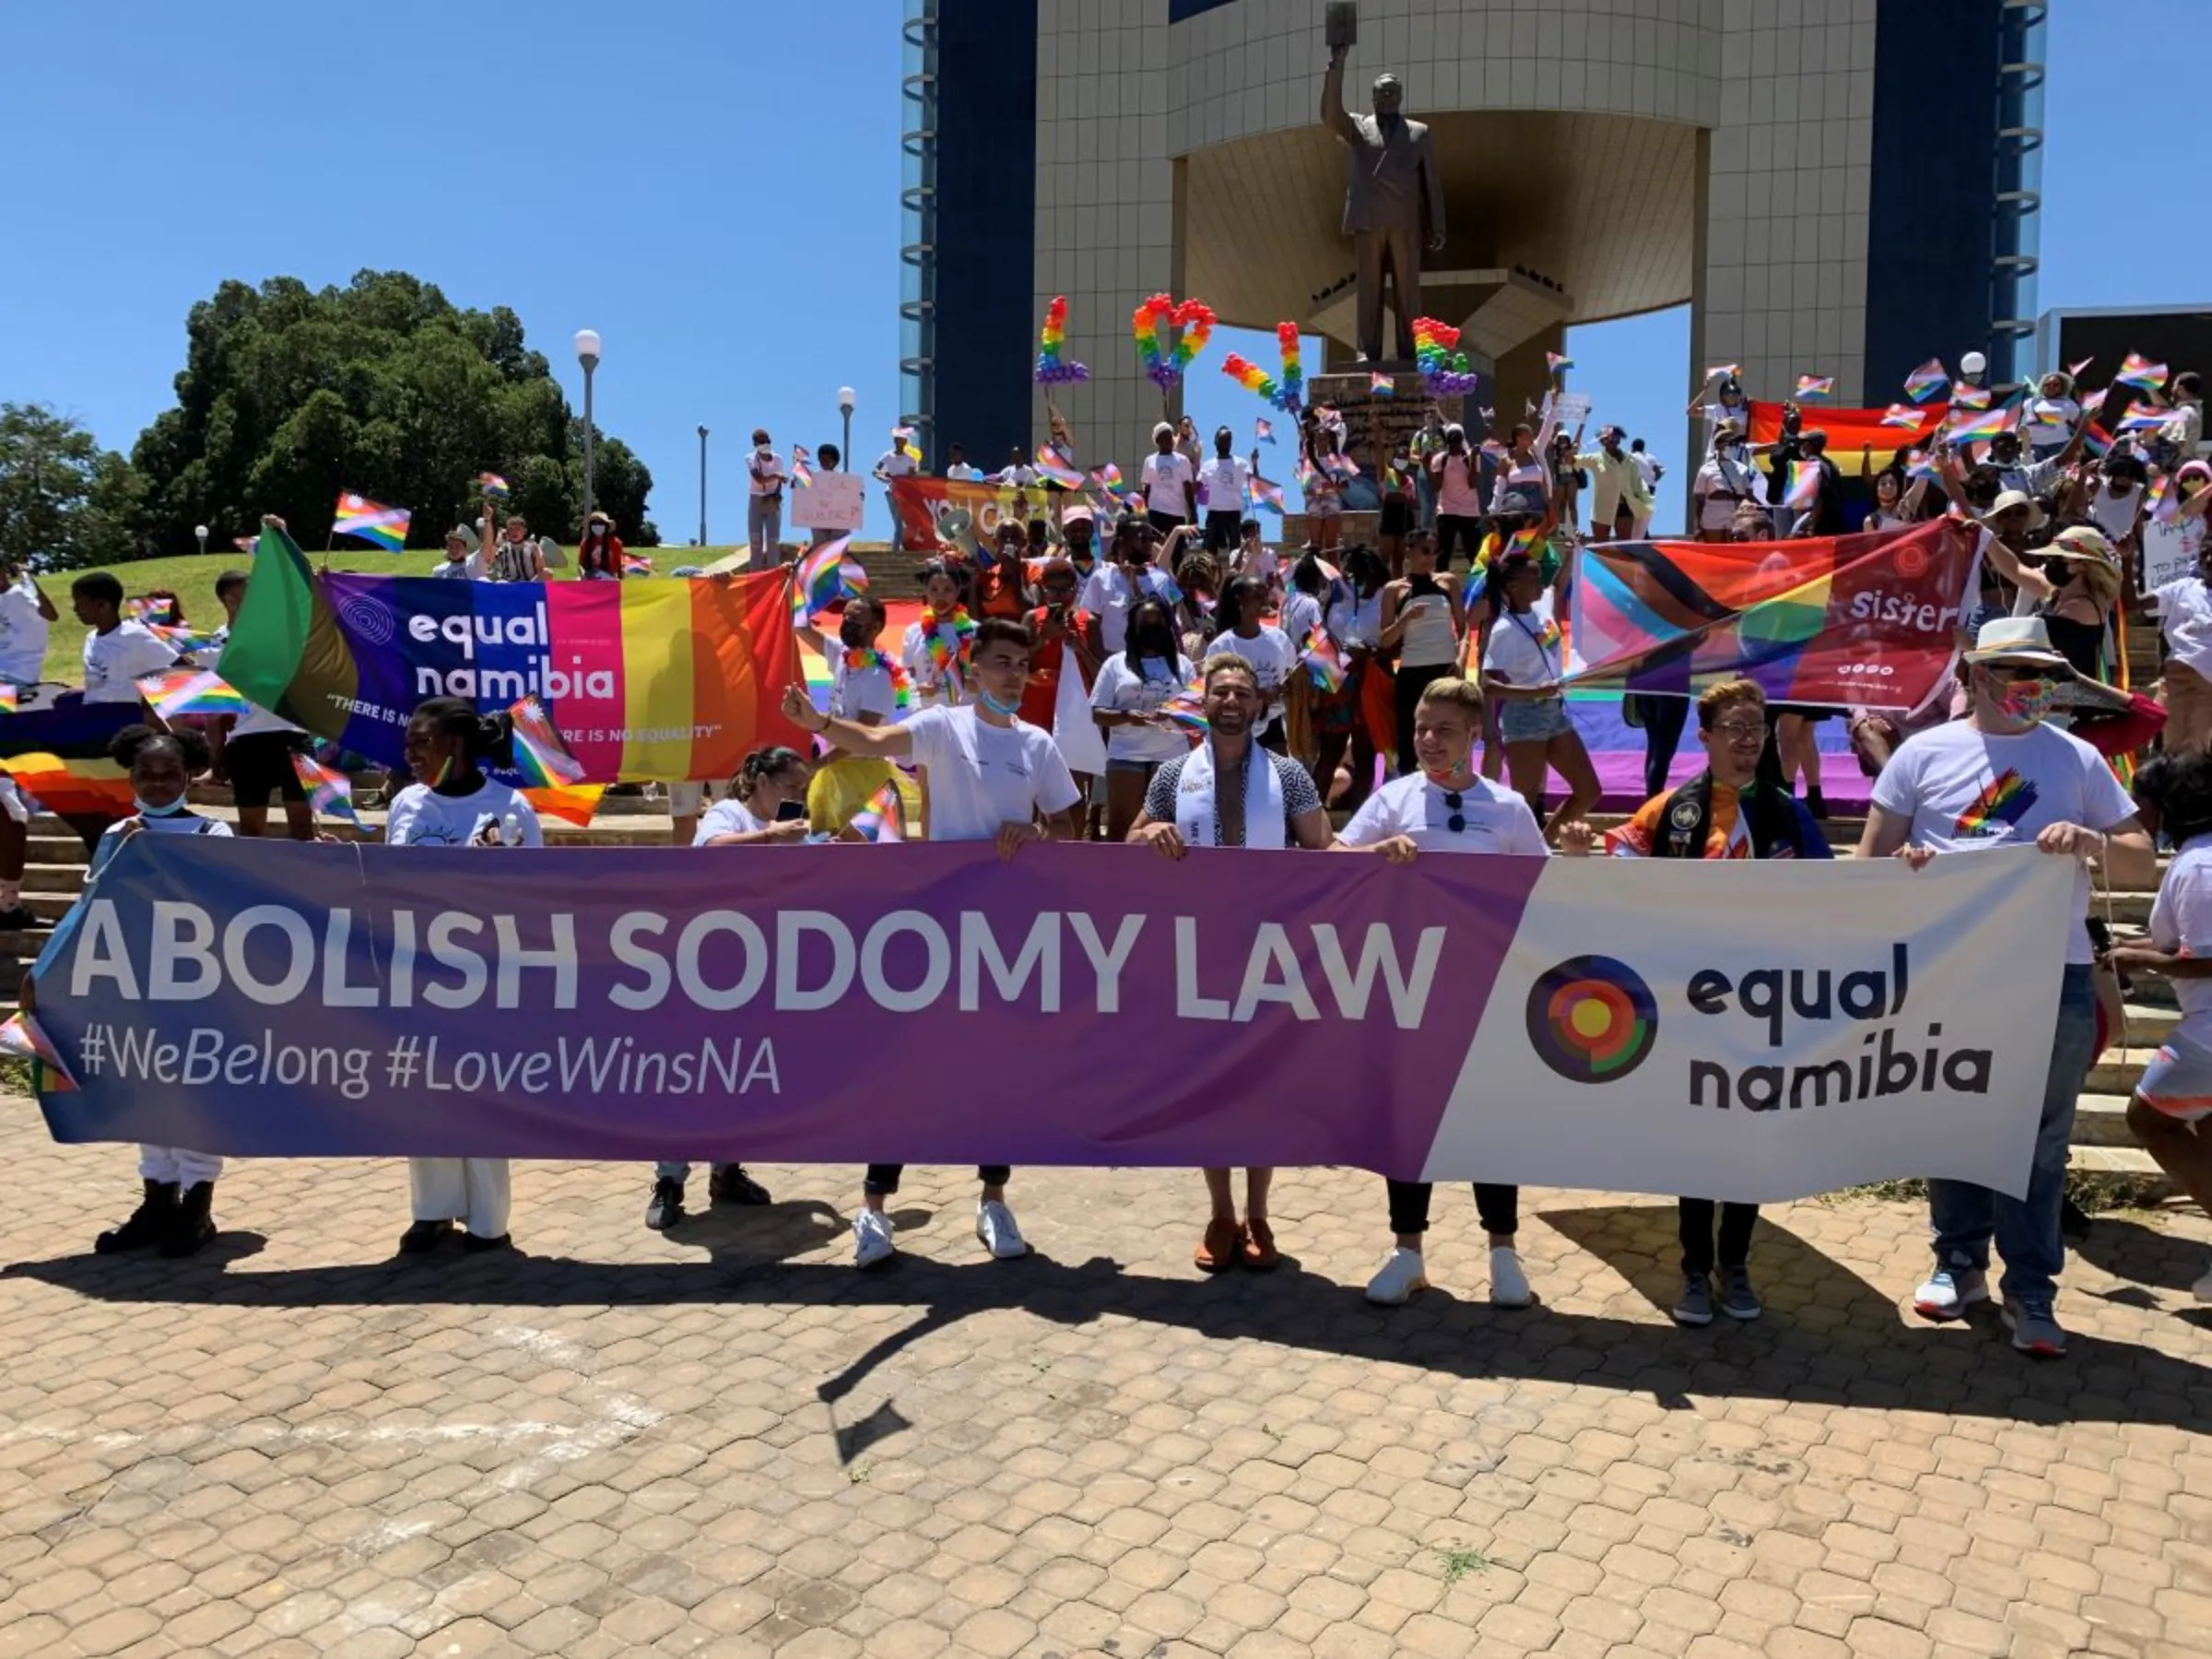 Equal Namibia participants marching at the Namibian Pride Parade, where the call for the decriminalisation of the Apartheid-era sodomy law was a focal point at the march in Windhoek